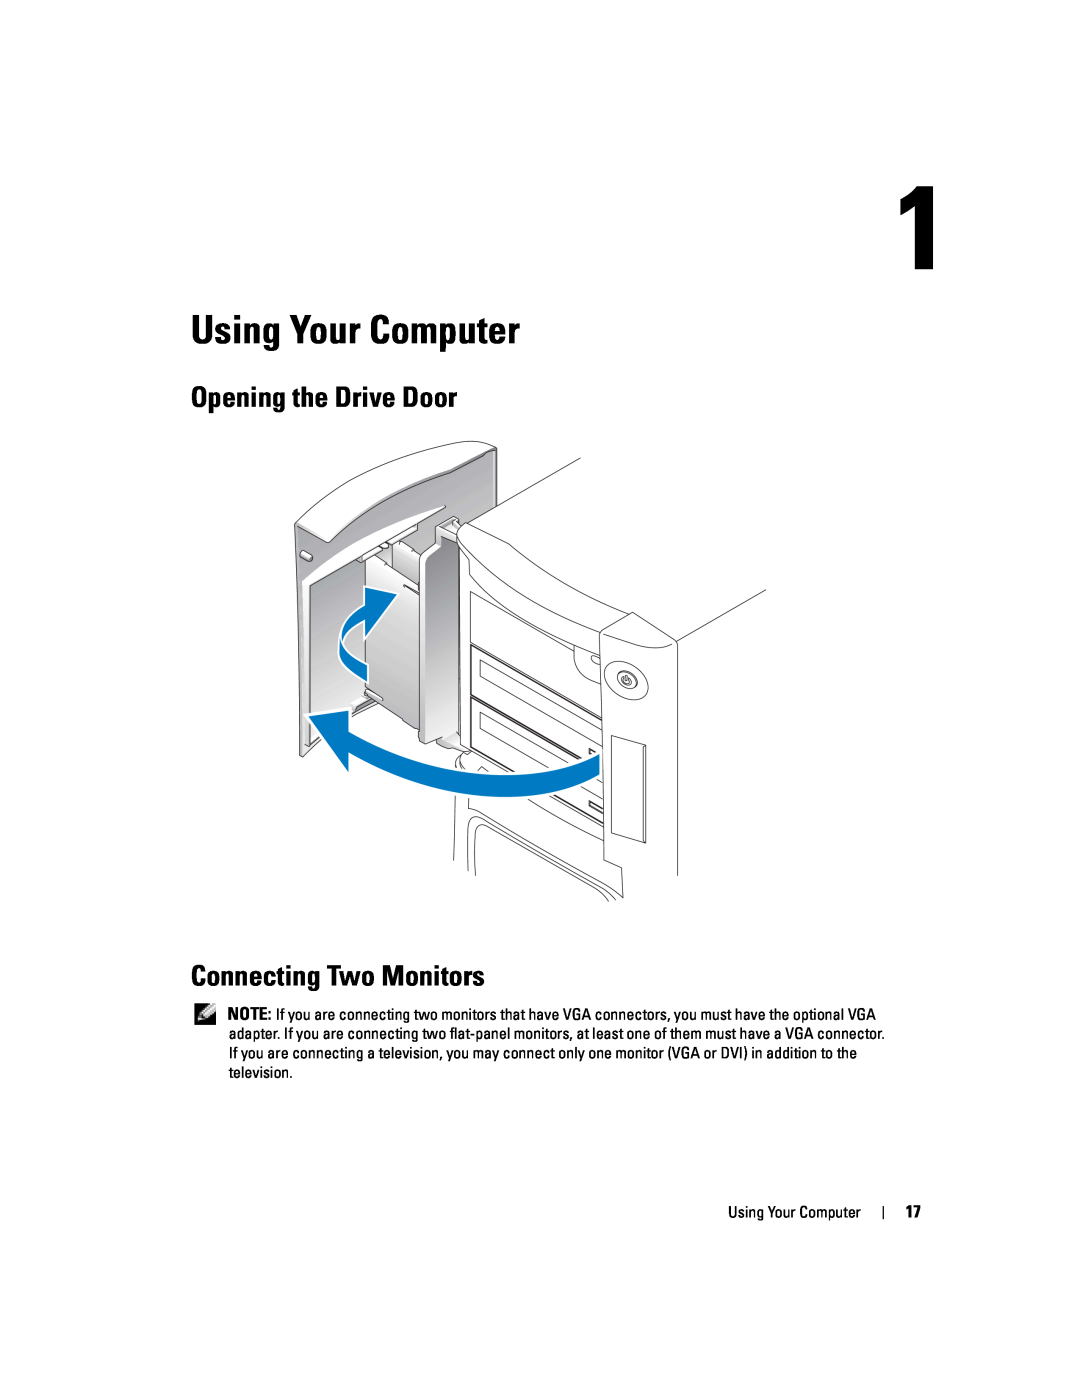 Dell XPS manual Using Your Computer, Opening the Drive Door Connecting Two Monitors 